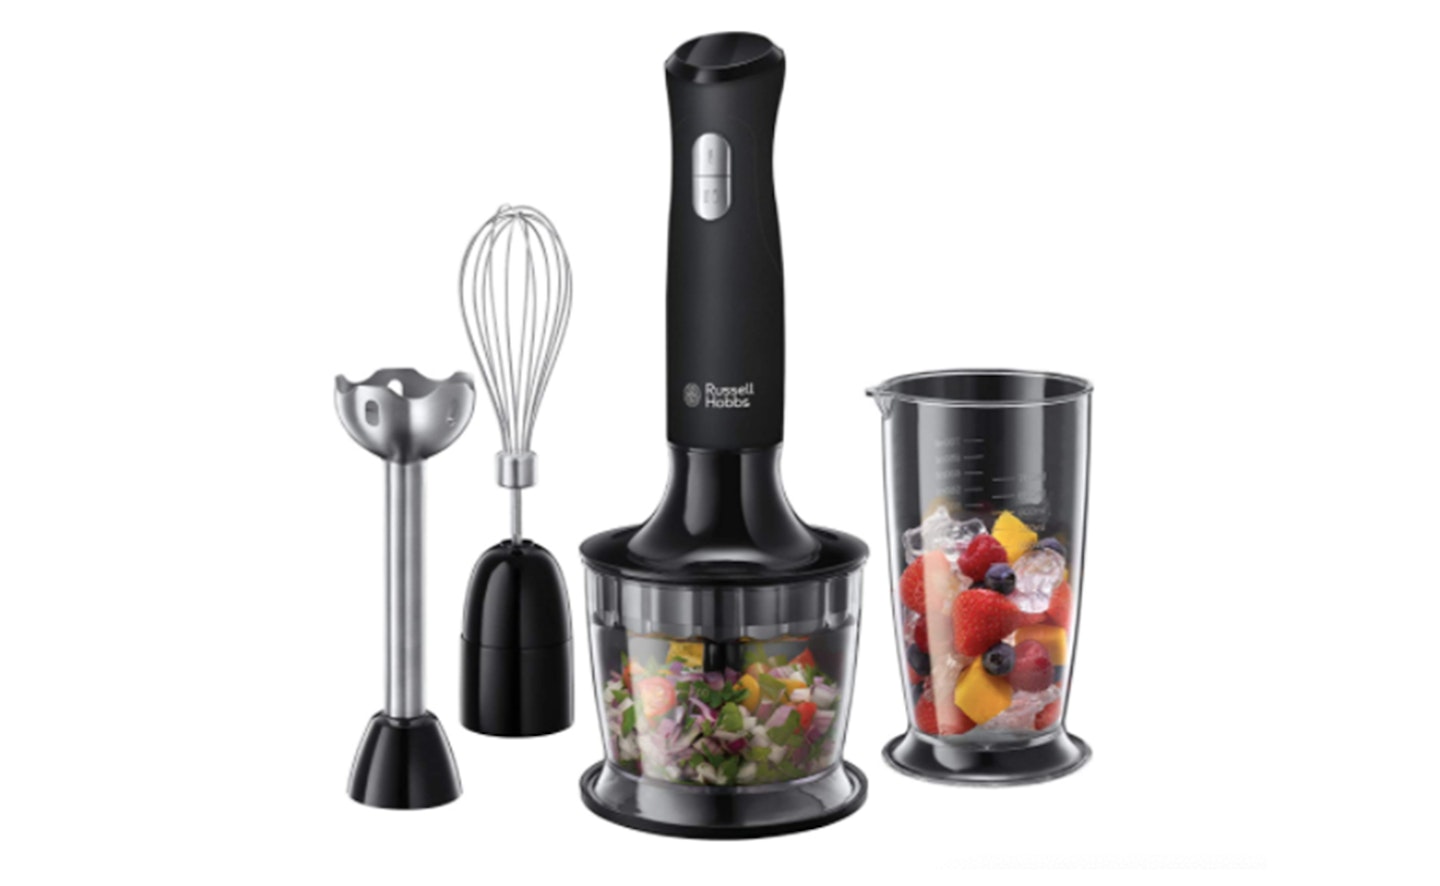 Russell Hobbs 24702 Desire 3 in 1 Hand Blender with Electric Whisk and Vegetable Chopper Attachments,